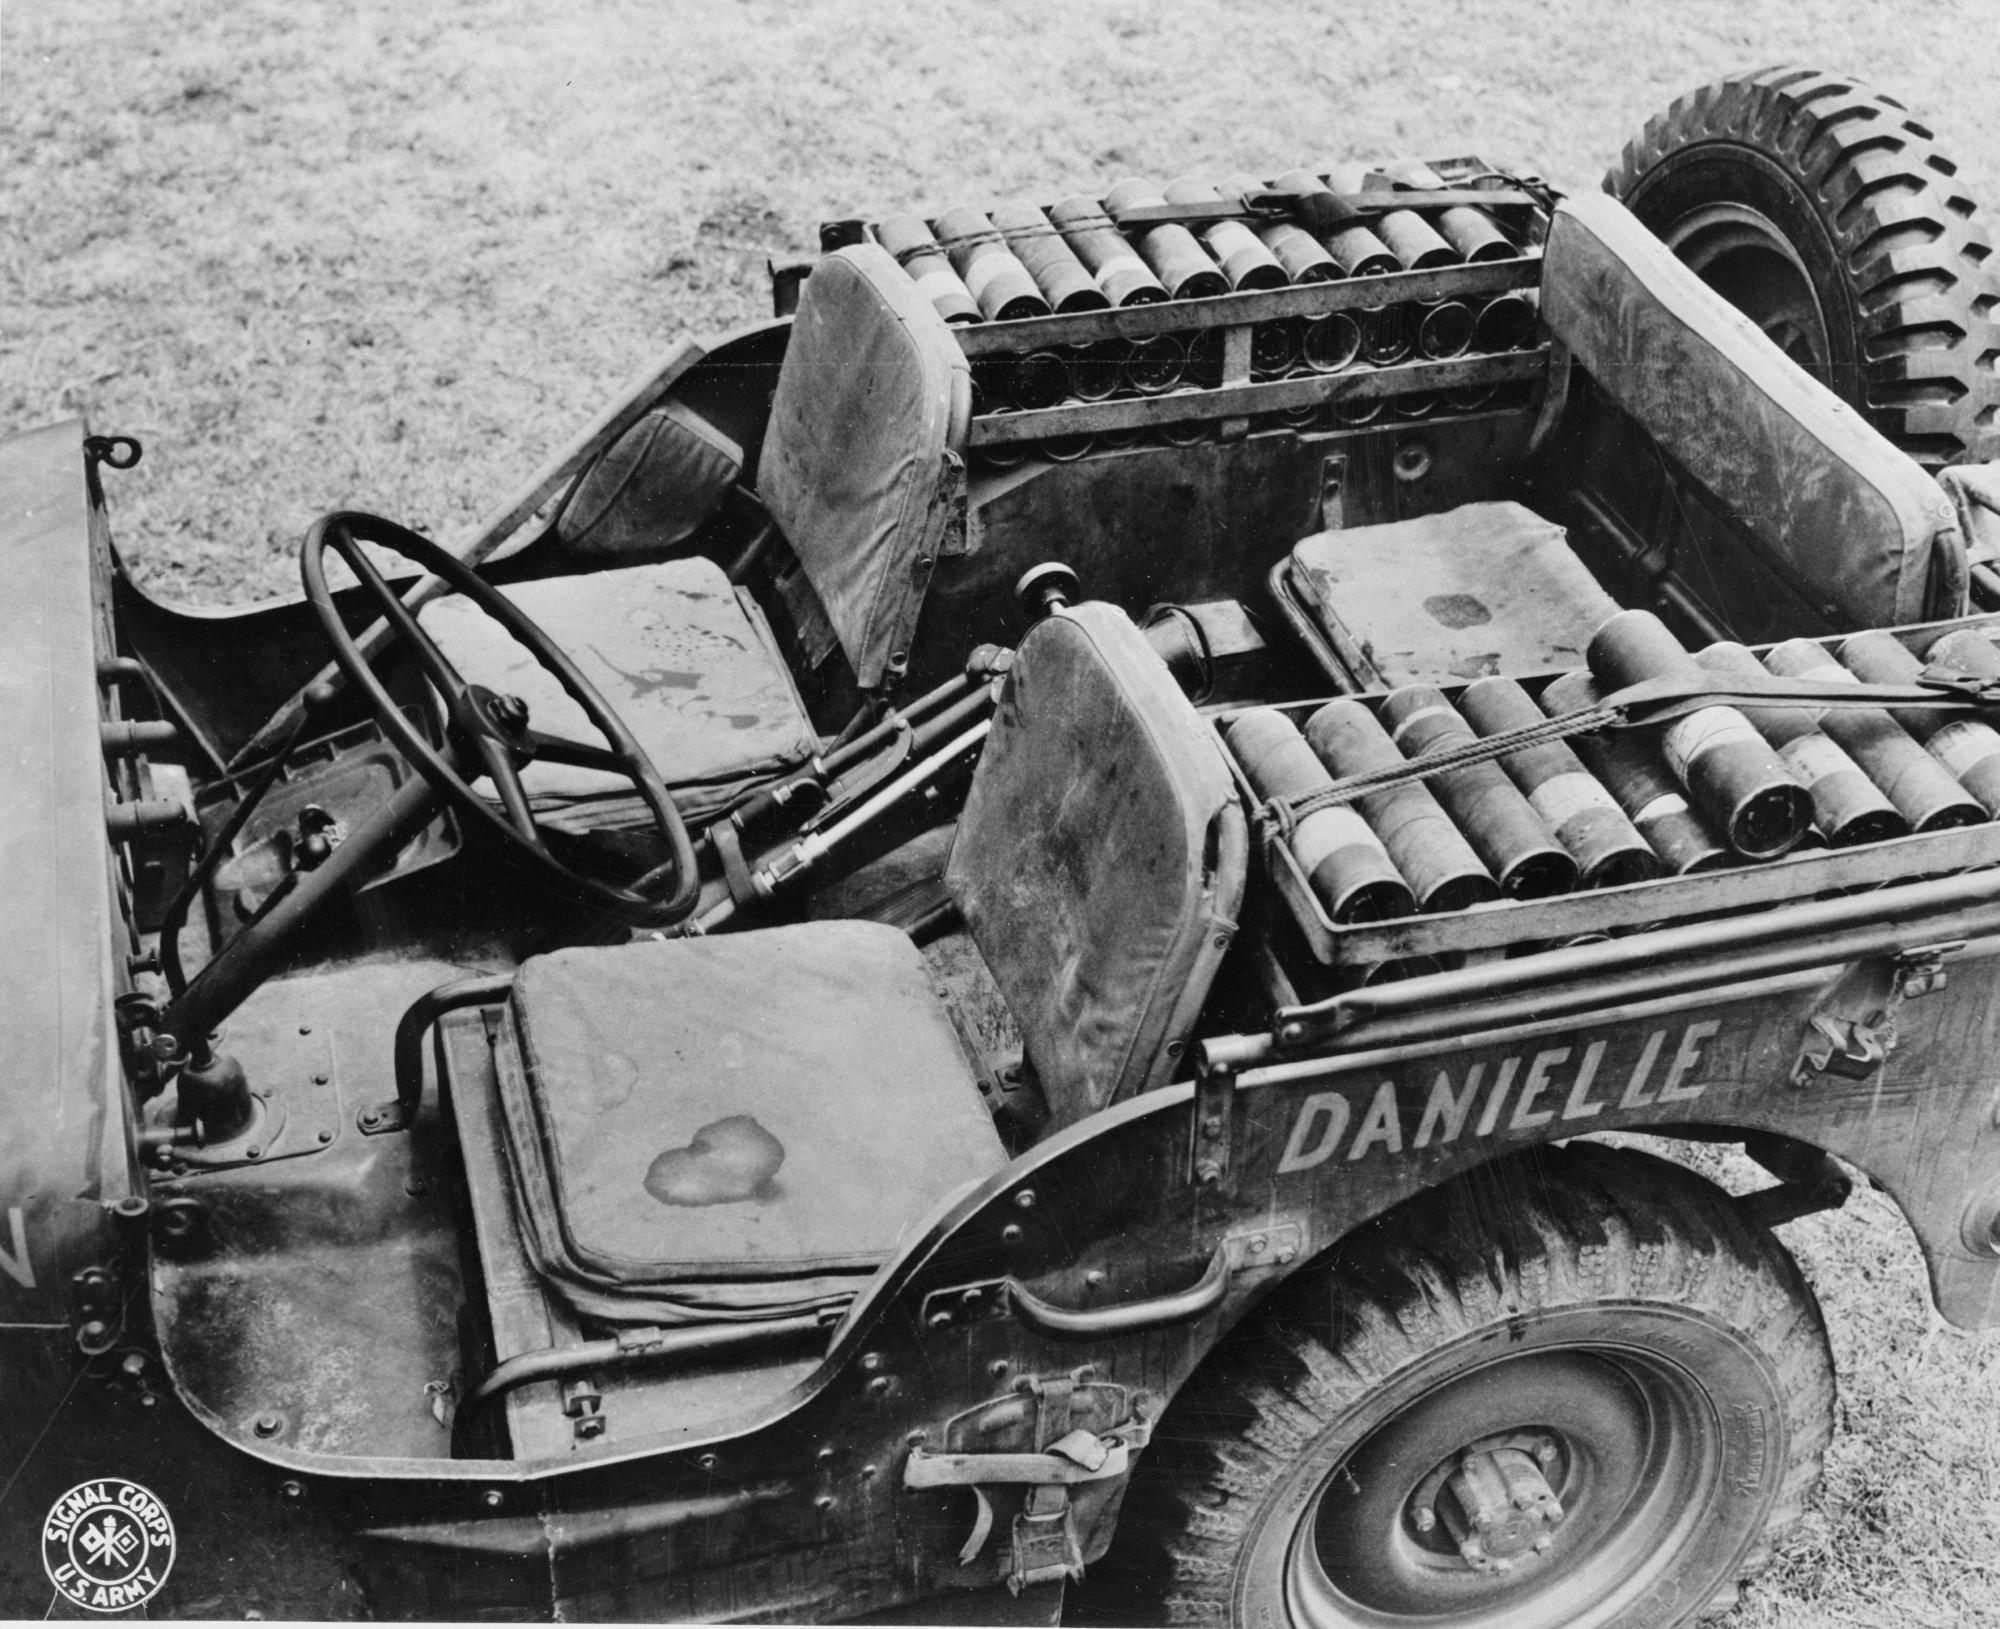 A Jeep packed with mortar shells, a mortar tube between the seats, and the mortar plate on the floor, New Caledonia, 1942.